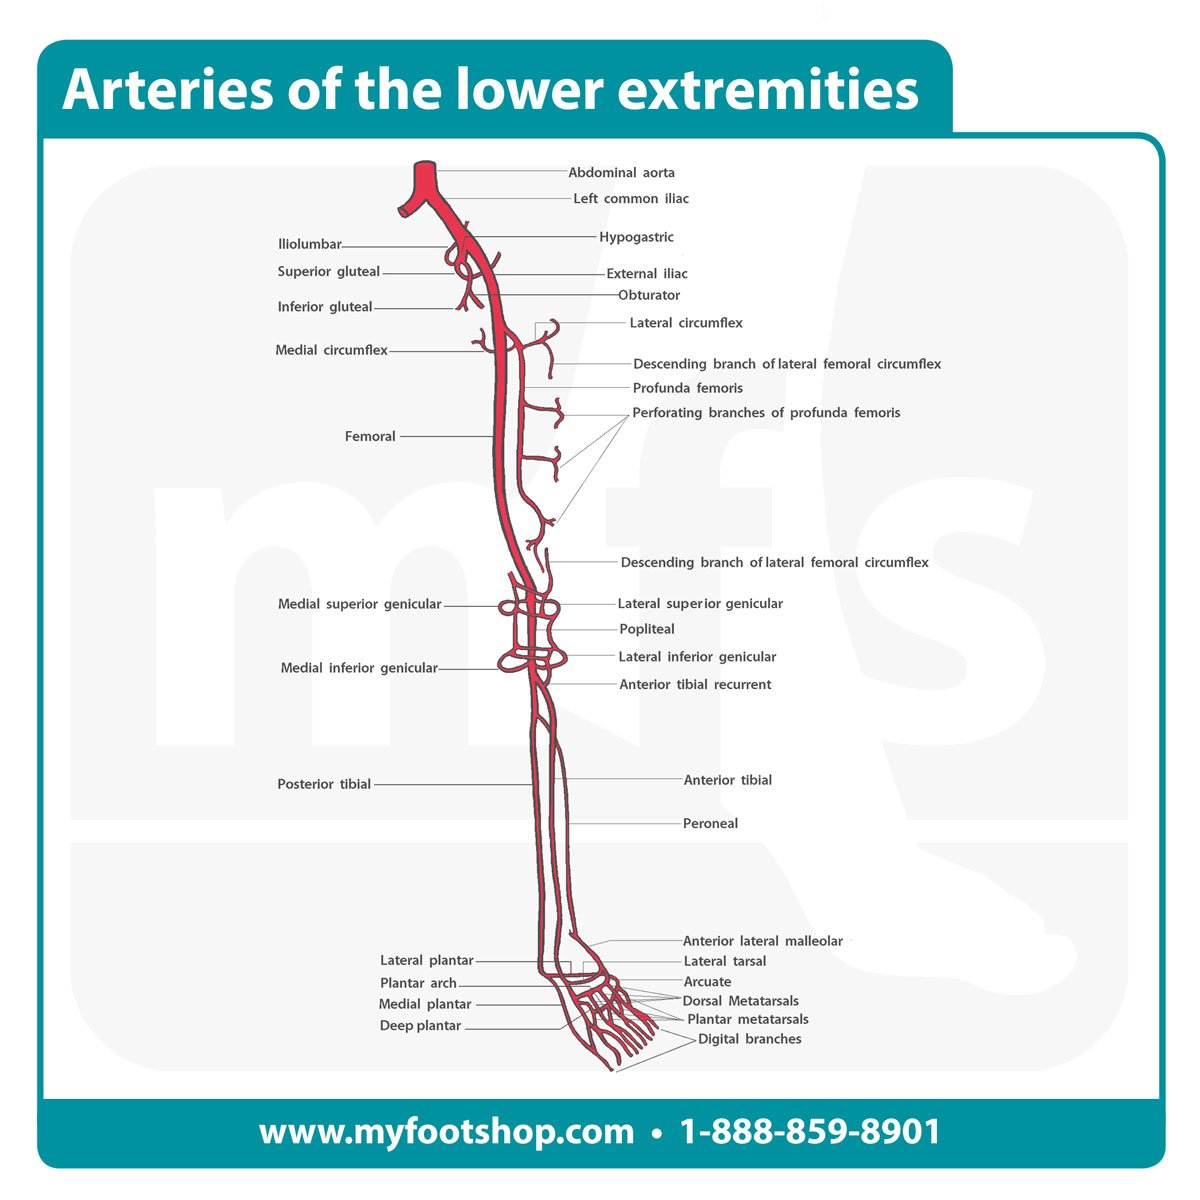 Arteries of the Lower Extremity | Lower extremity anatomy | MyFootShop.com